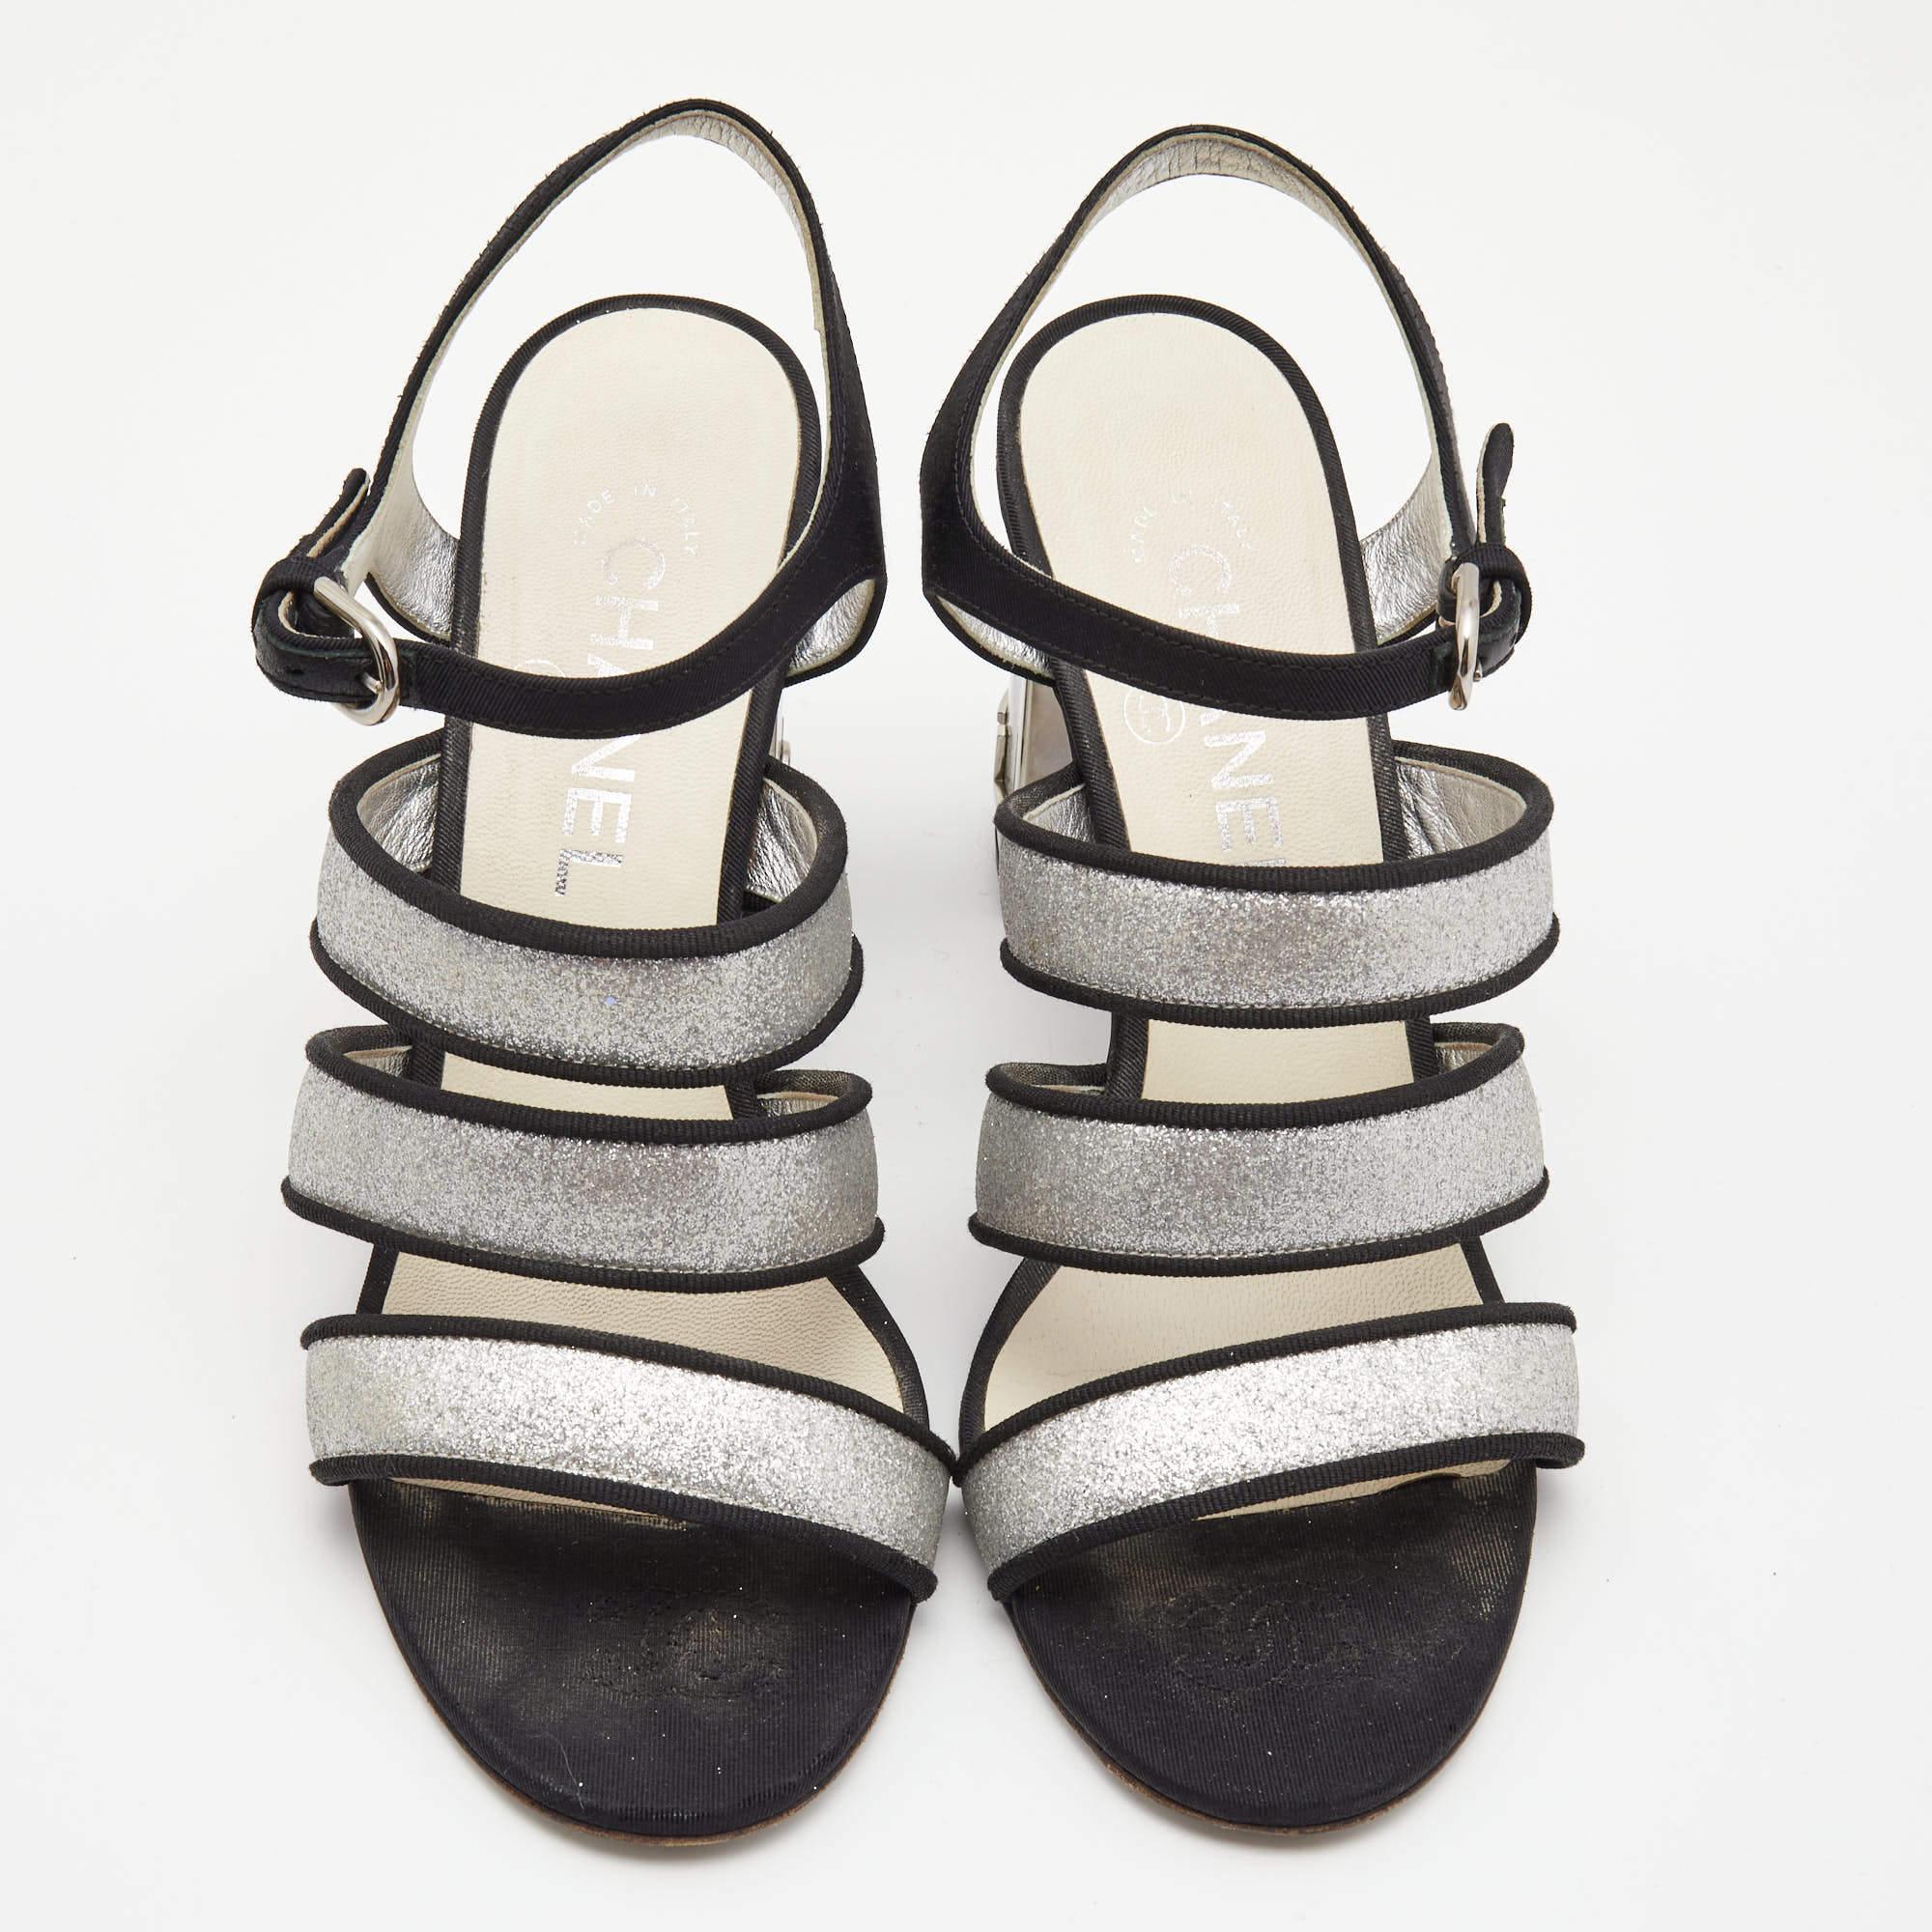 Mixing the classic Chanel sophistication with a modern look, these sandals are a perfect choice for those special occasions and parties. Constructed in metallic silver glitter leather and fabric trims, these sandals feature a strappy front for a